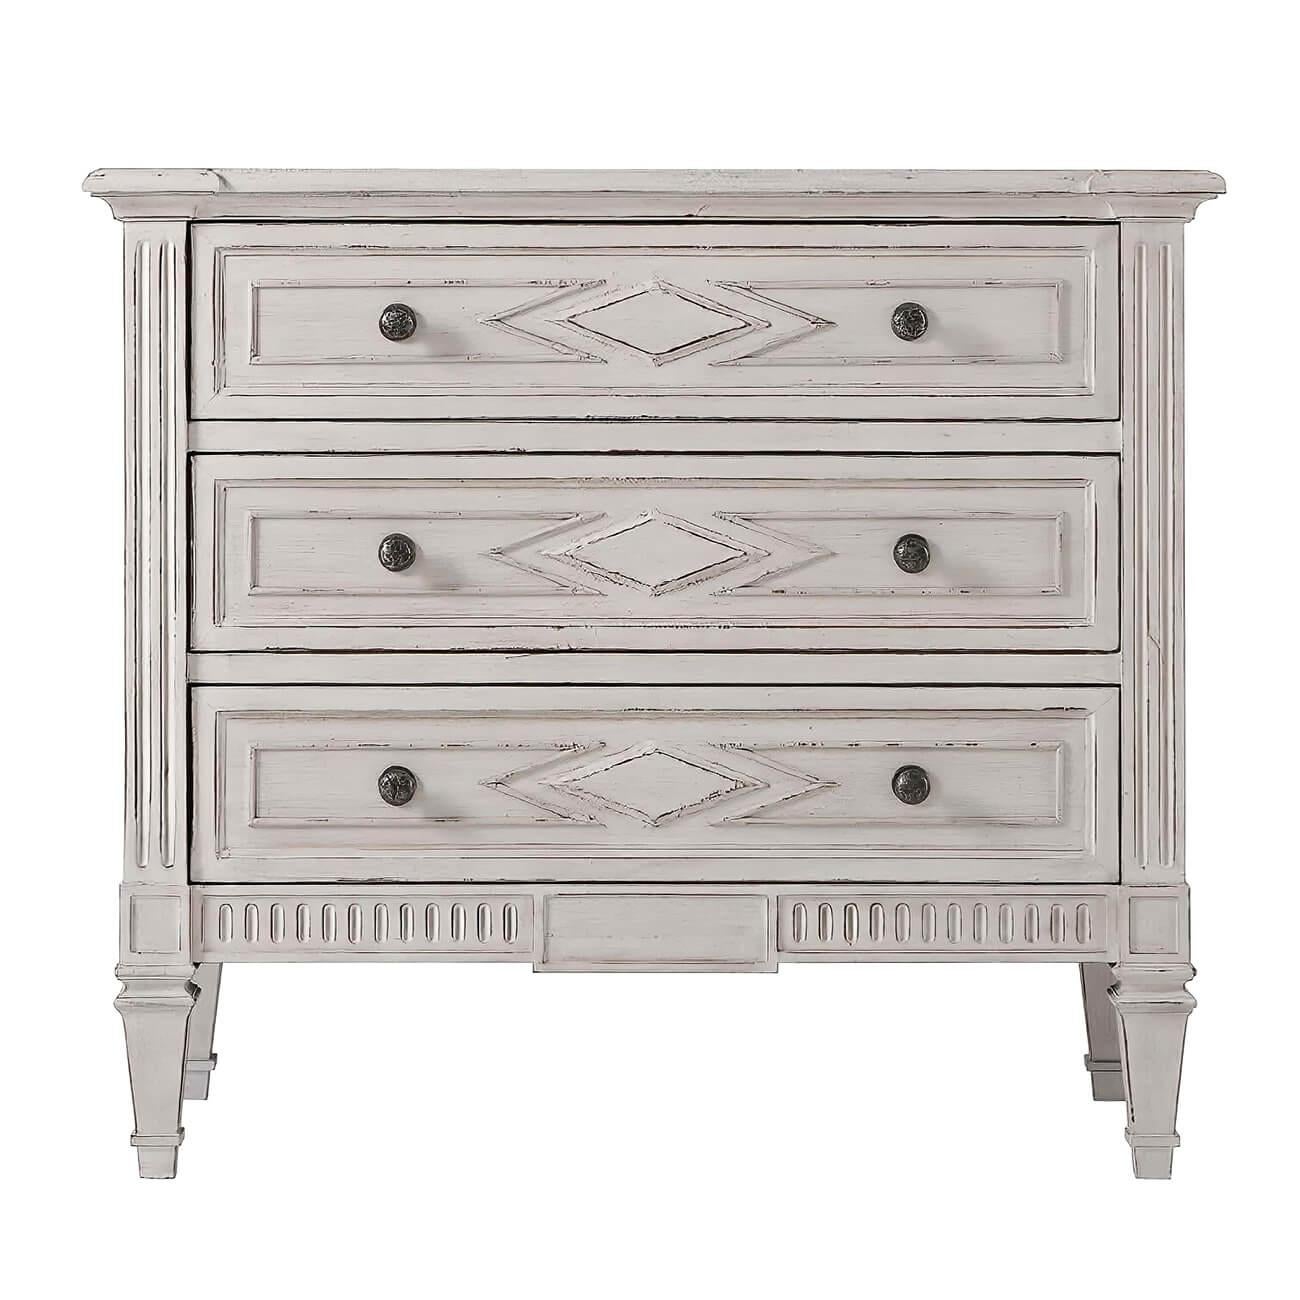 Northern European style distress painted dresser with a molded edge rectangular top, three long paneled drawers with lozenge detailing and antique pewter handles, with carved fluted details and raised on square tapered legs.
Dimensions: 36